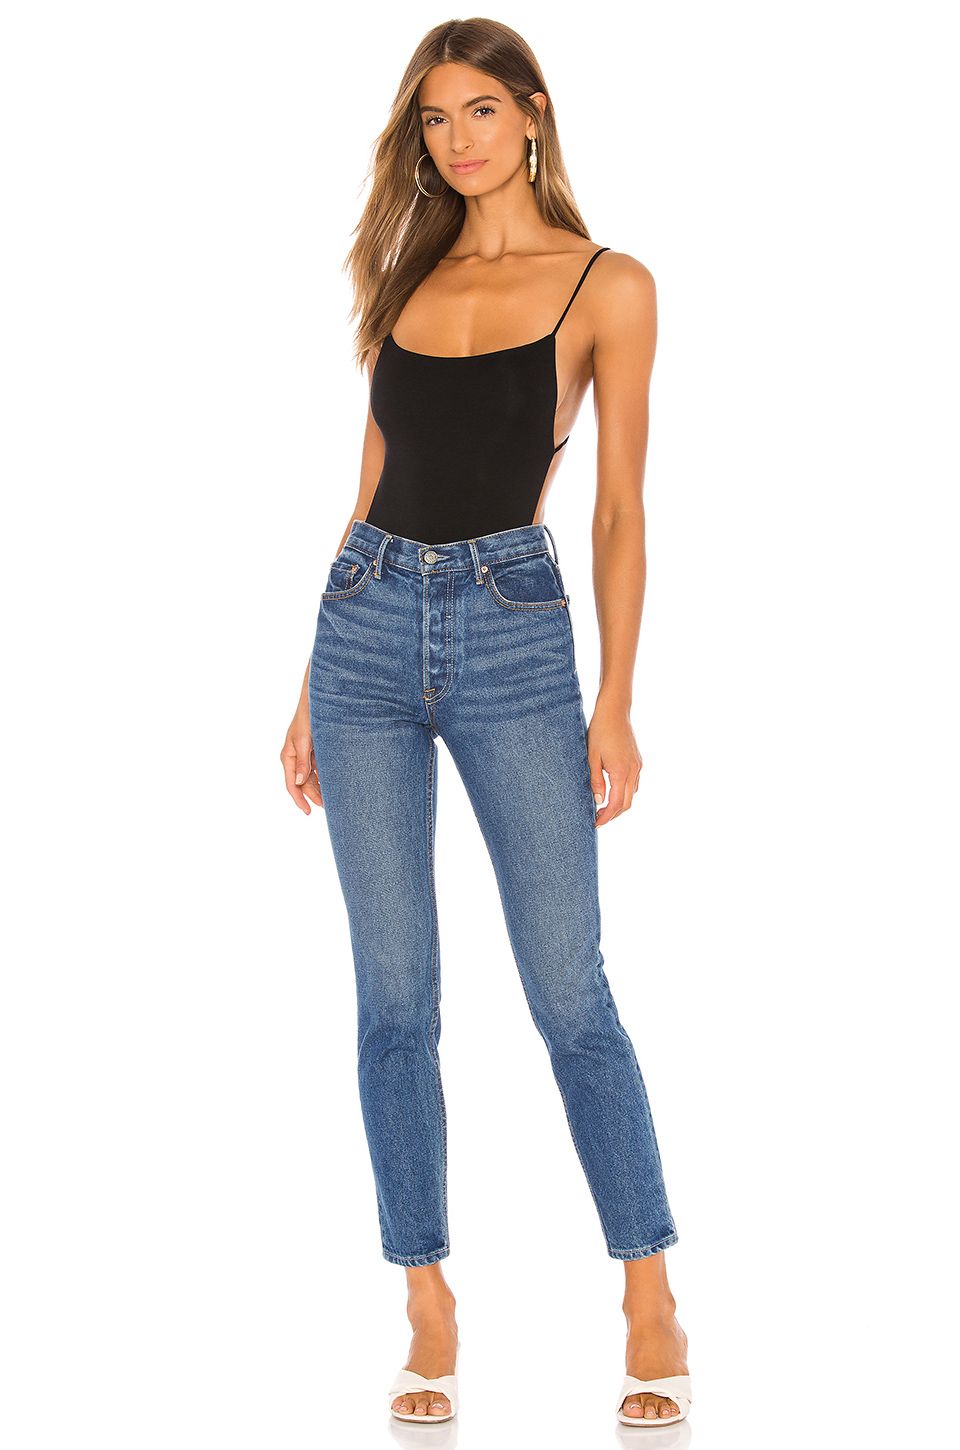 Buy > outfits with black bodysuit > in stock